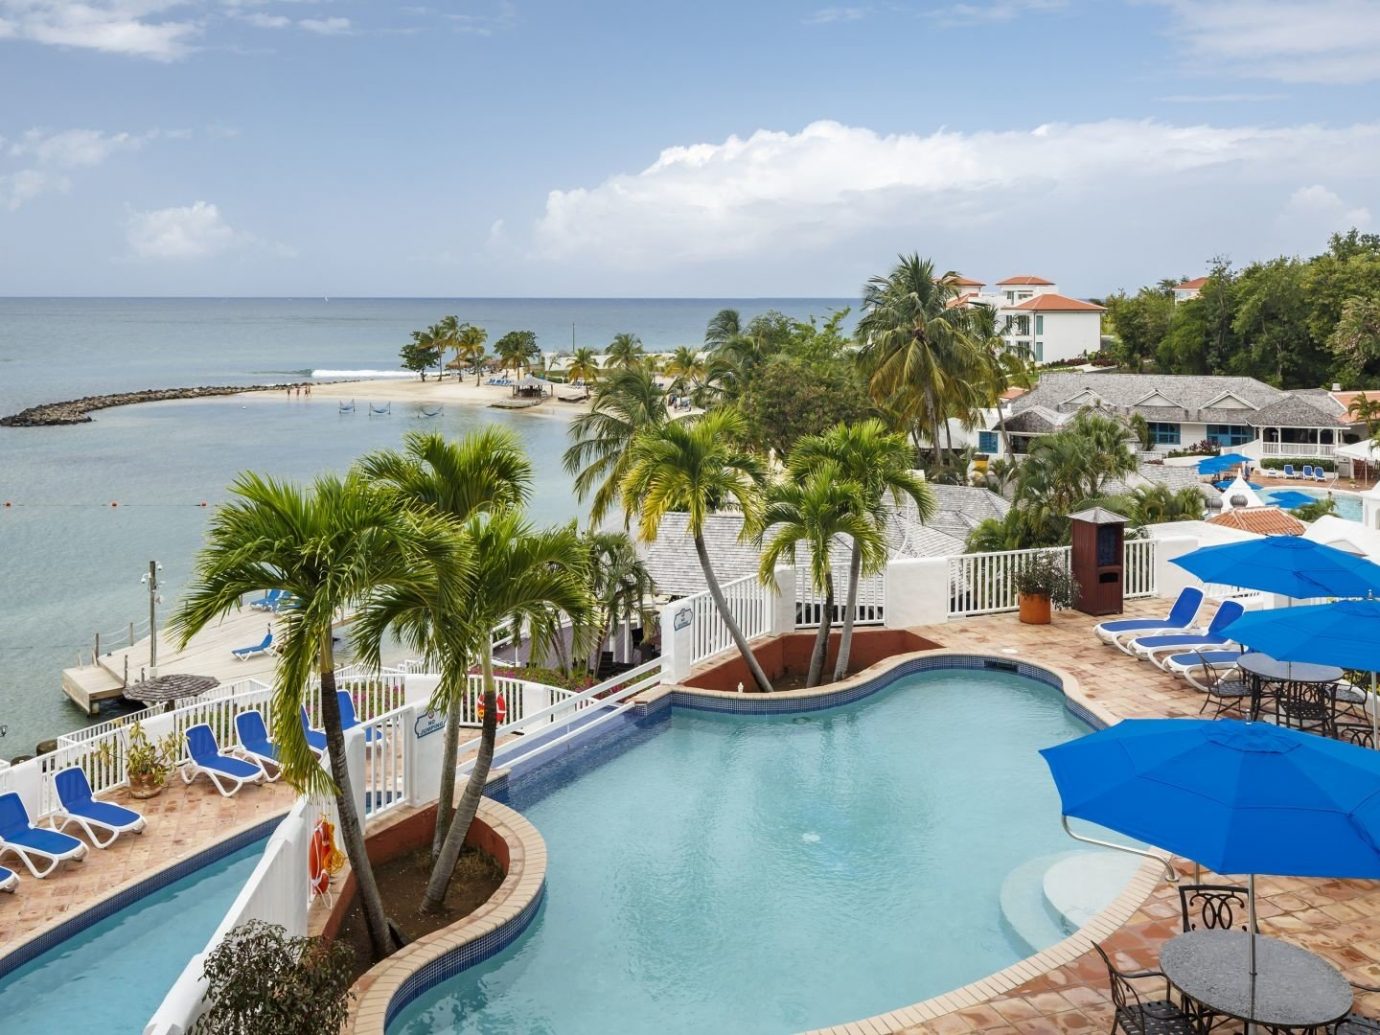 The 10 BEST Affordable AllInclusive Resorts in the 